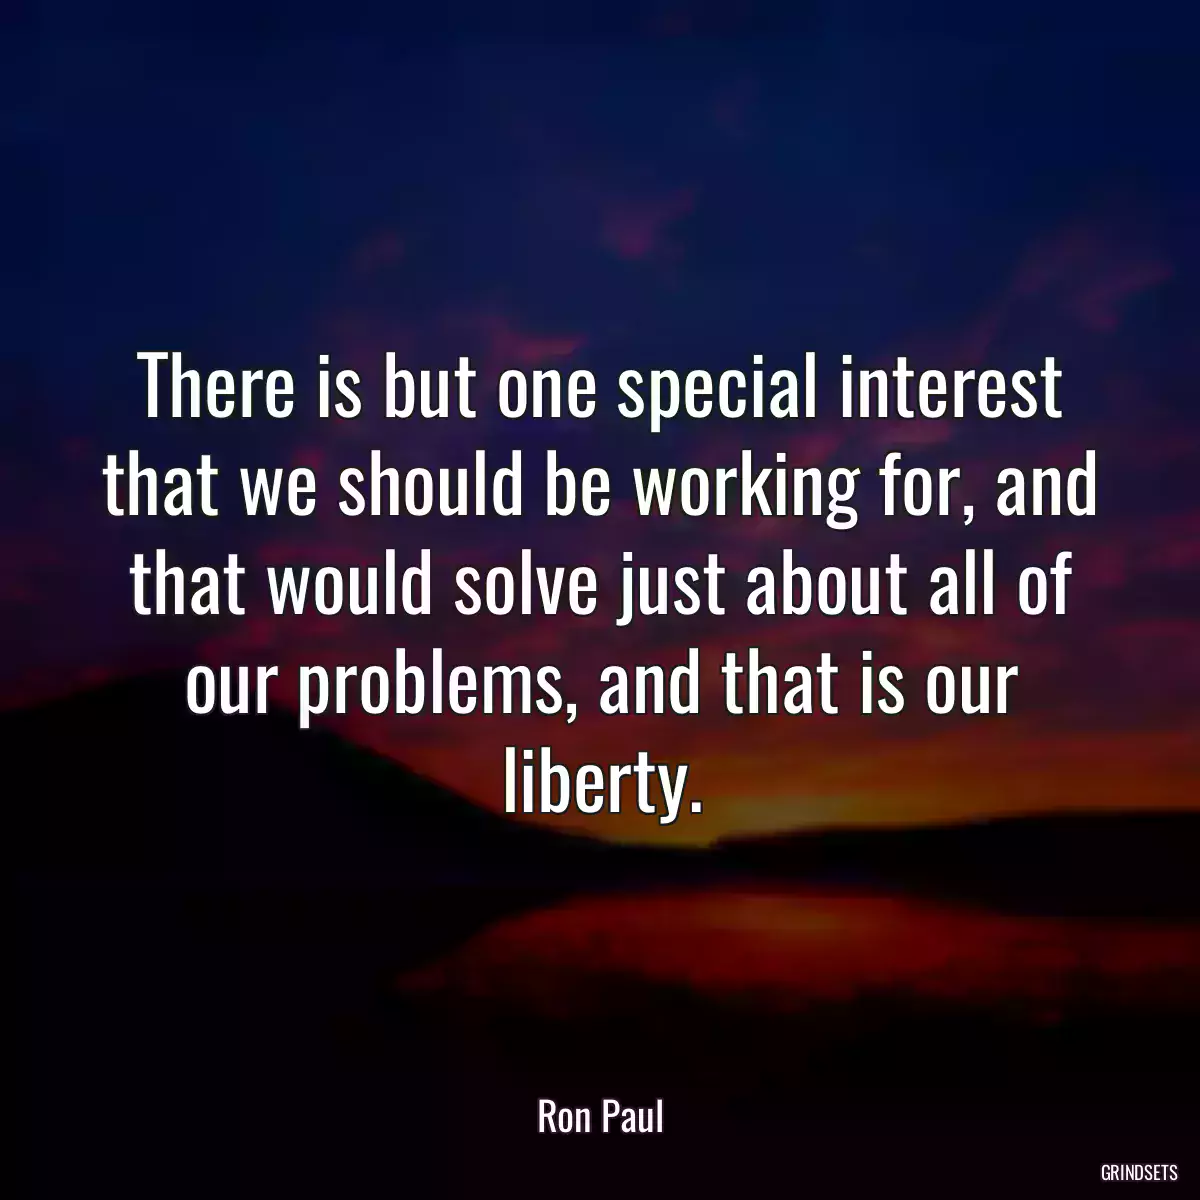 There is but one special interest that we should be working for, and that would solve just about all of our problems, and that is our liberty.